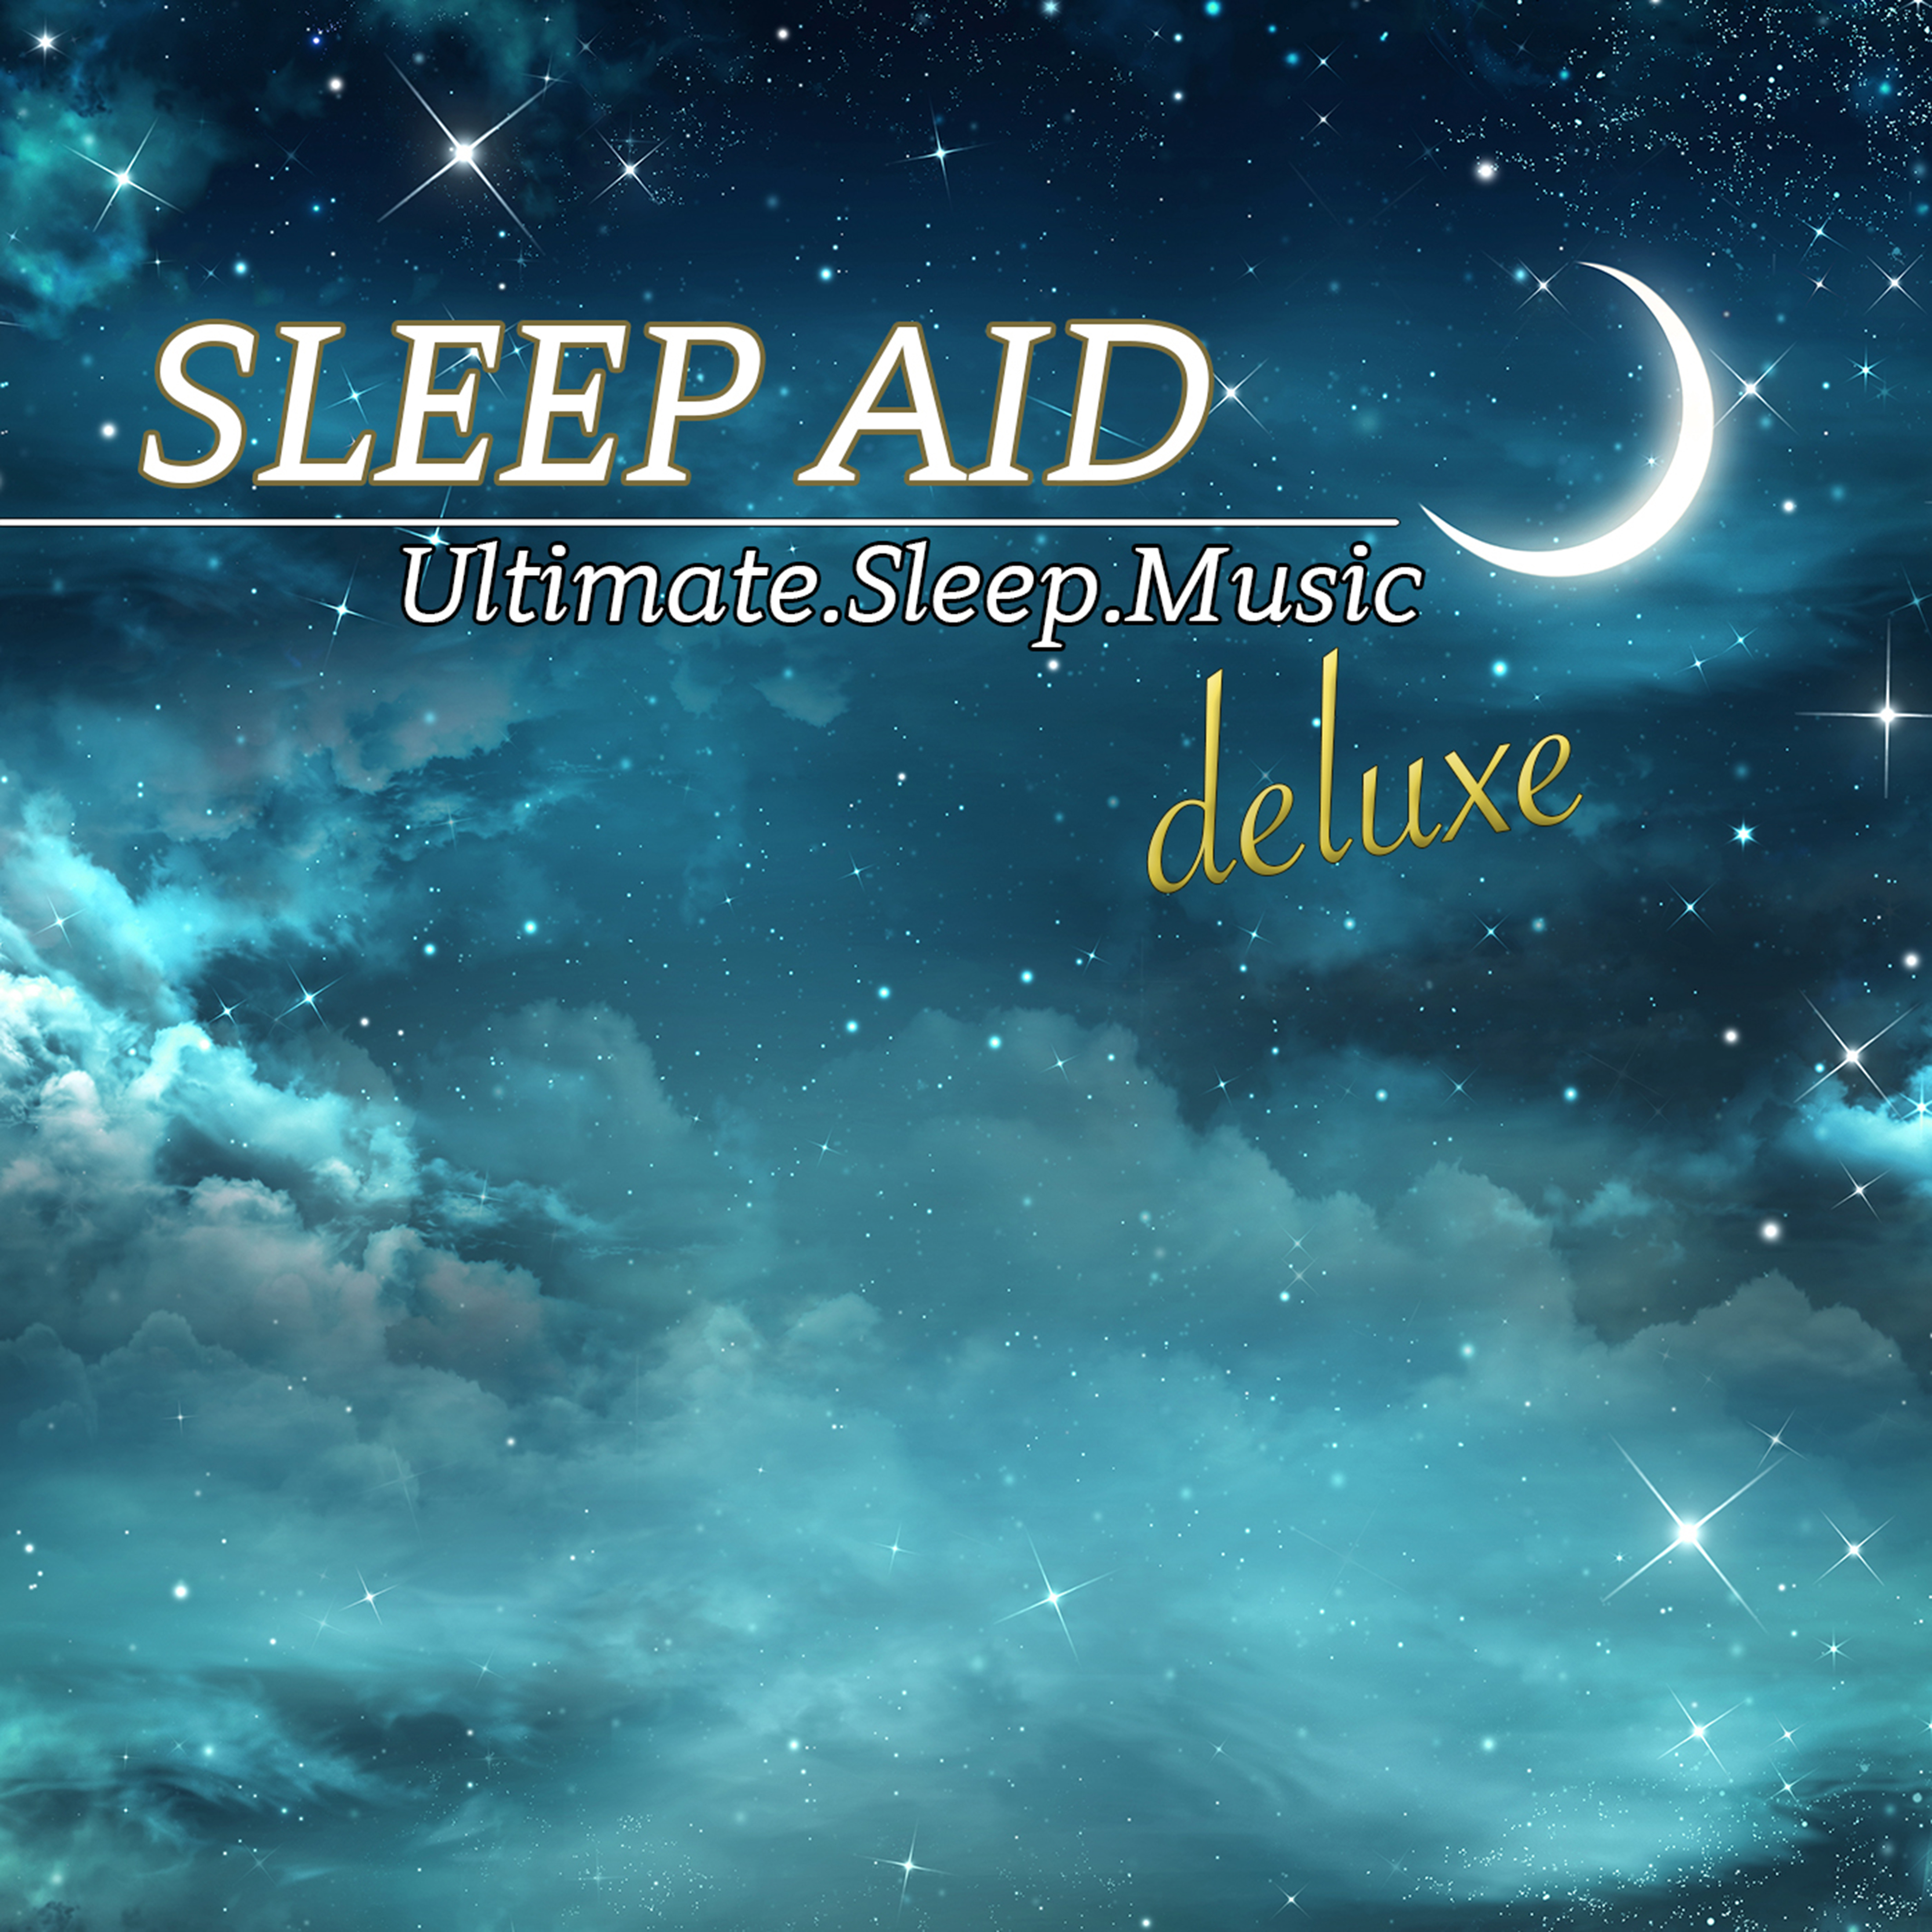 Sleep Aid Deluxe - Ultimate Sleep Music Relaxation, Sleep Easy With Dr. Waheguru Ambient Nature Sounds, Lullaby Music Interludes & Meditation 432hz Music Melody (Deluxe Edition)